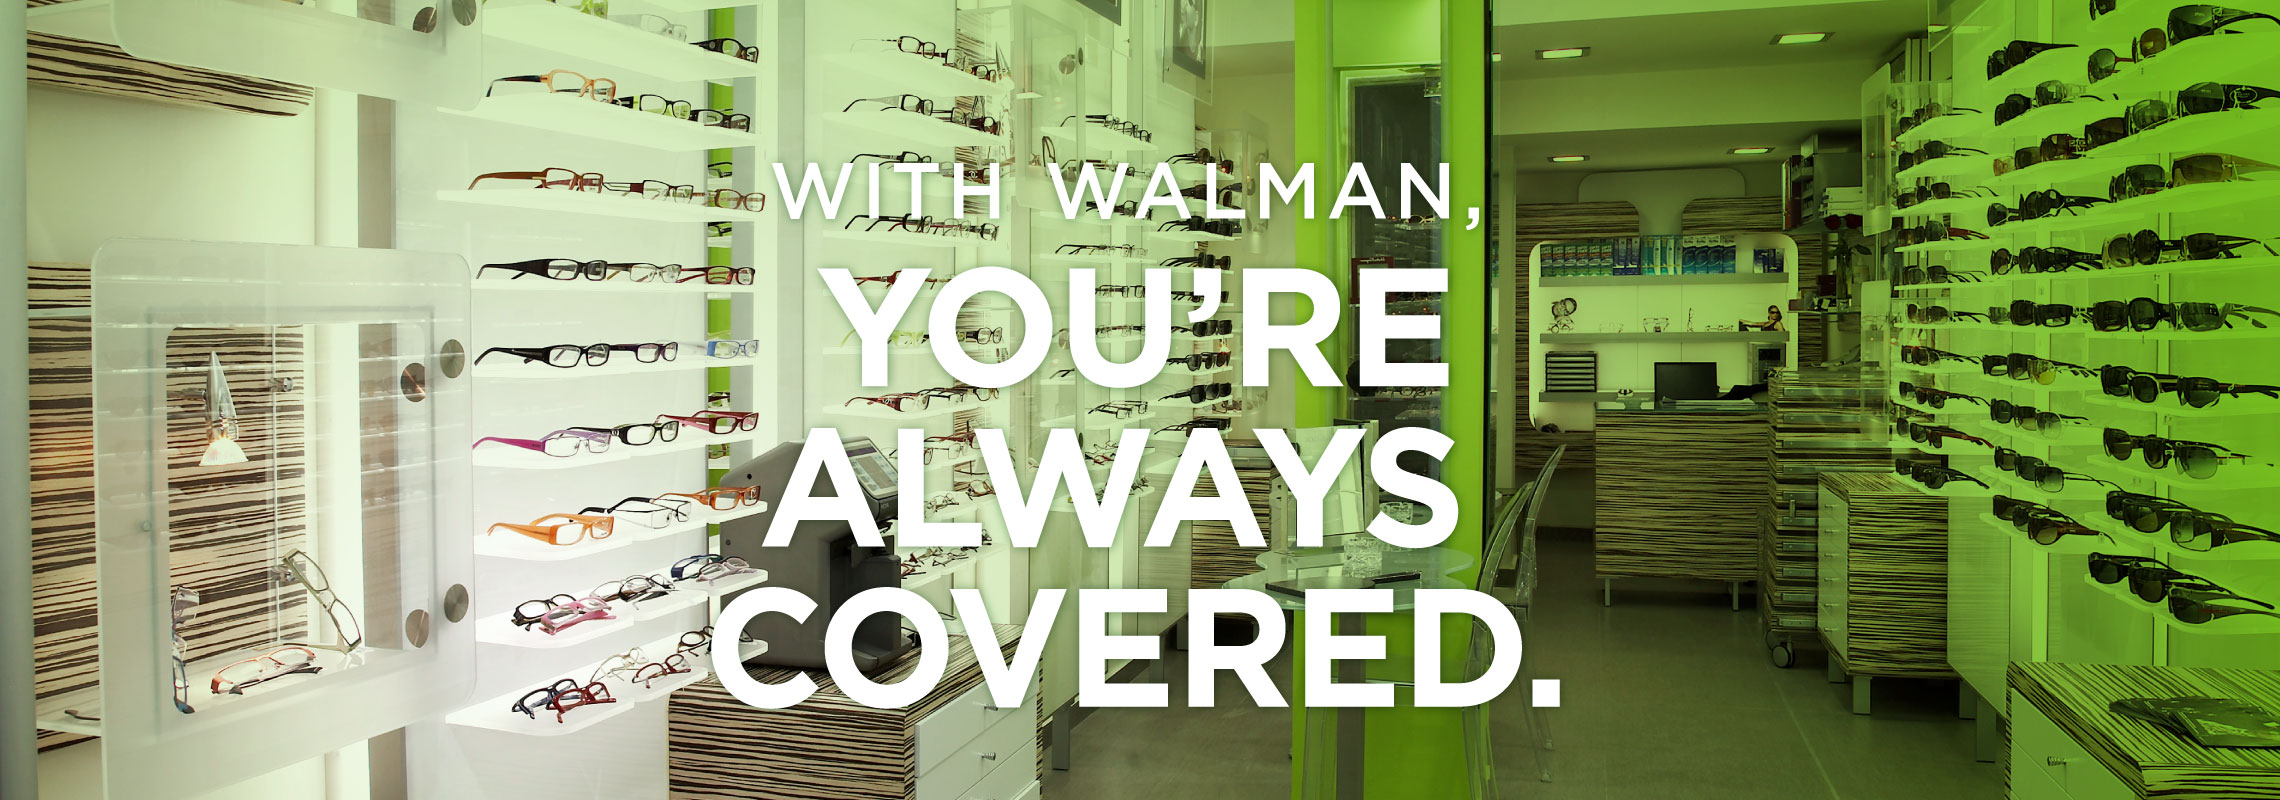 With-Walman-You-Are-Always-Covered